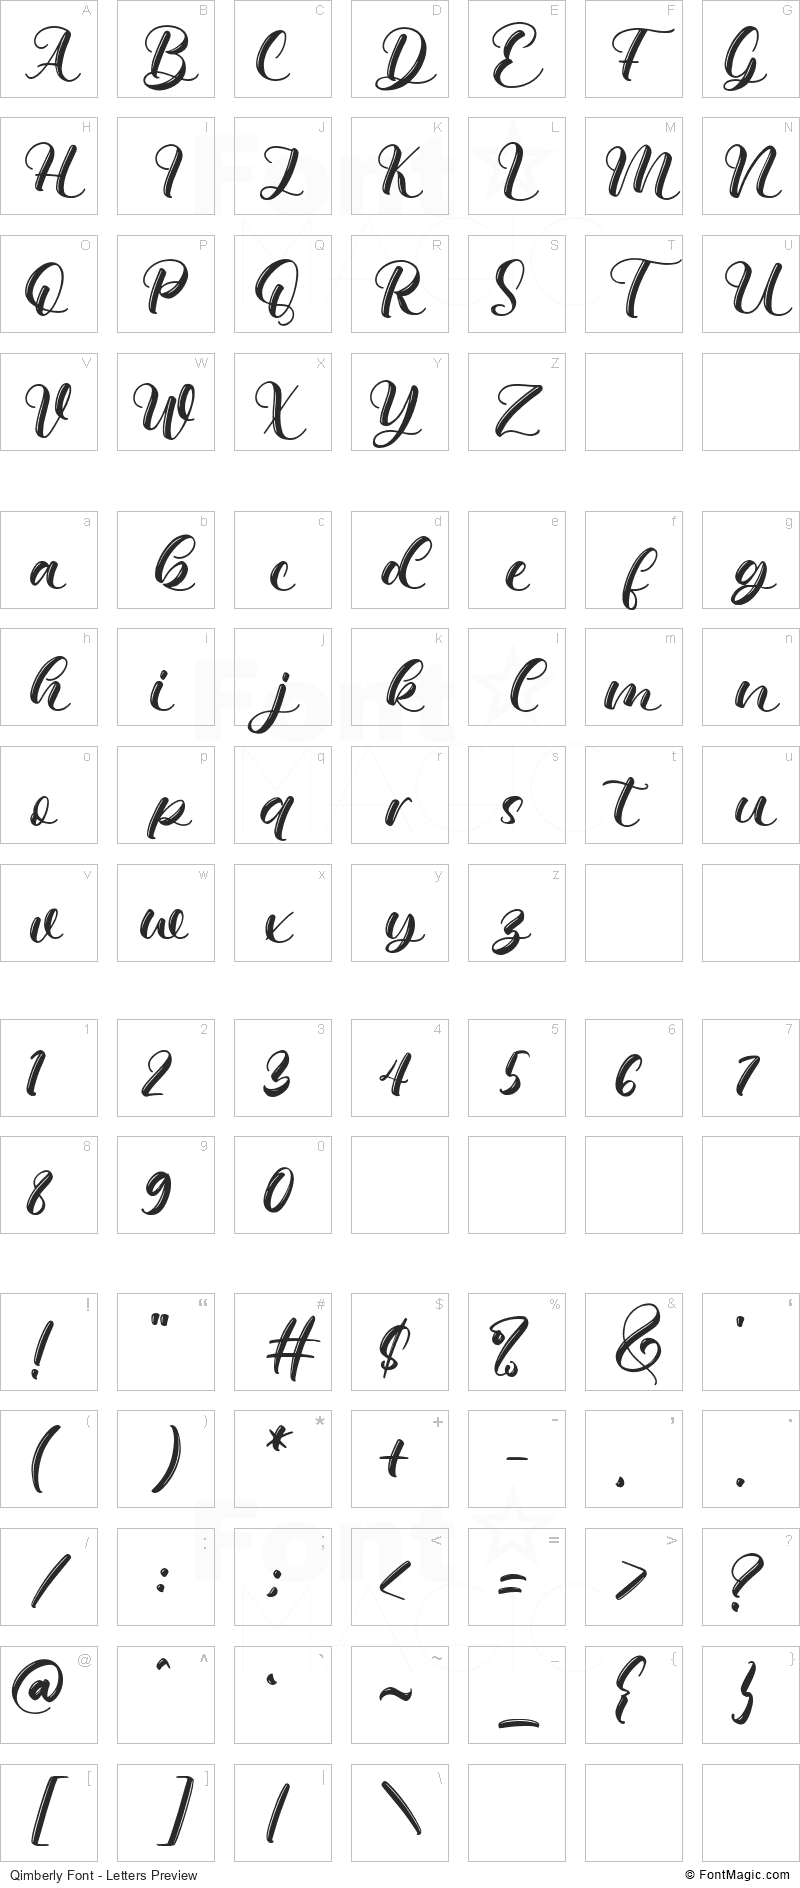 Qimberly Font - All Latters Preview Chart